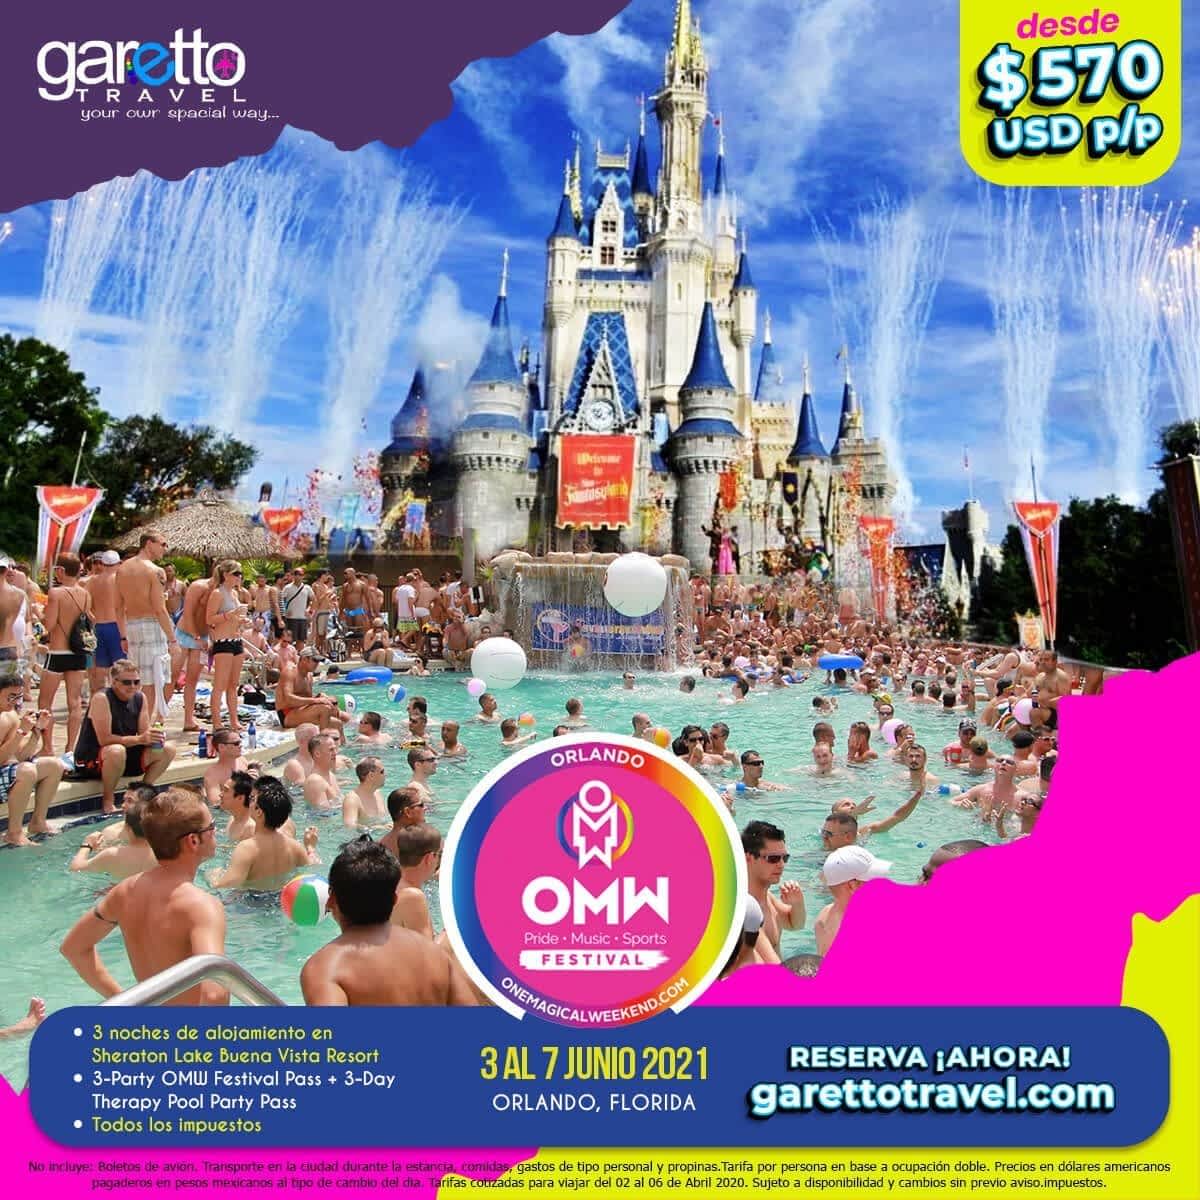 One Magical Weekend 2021 Garetto Travel